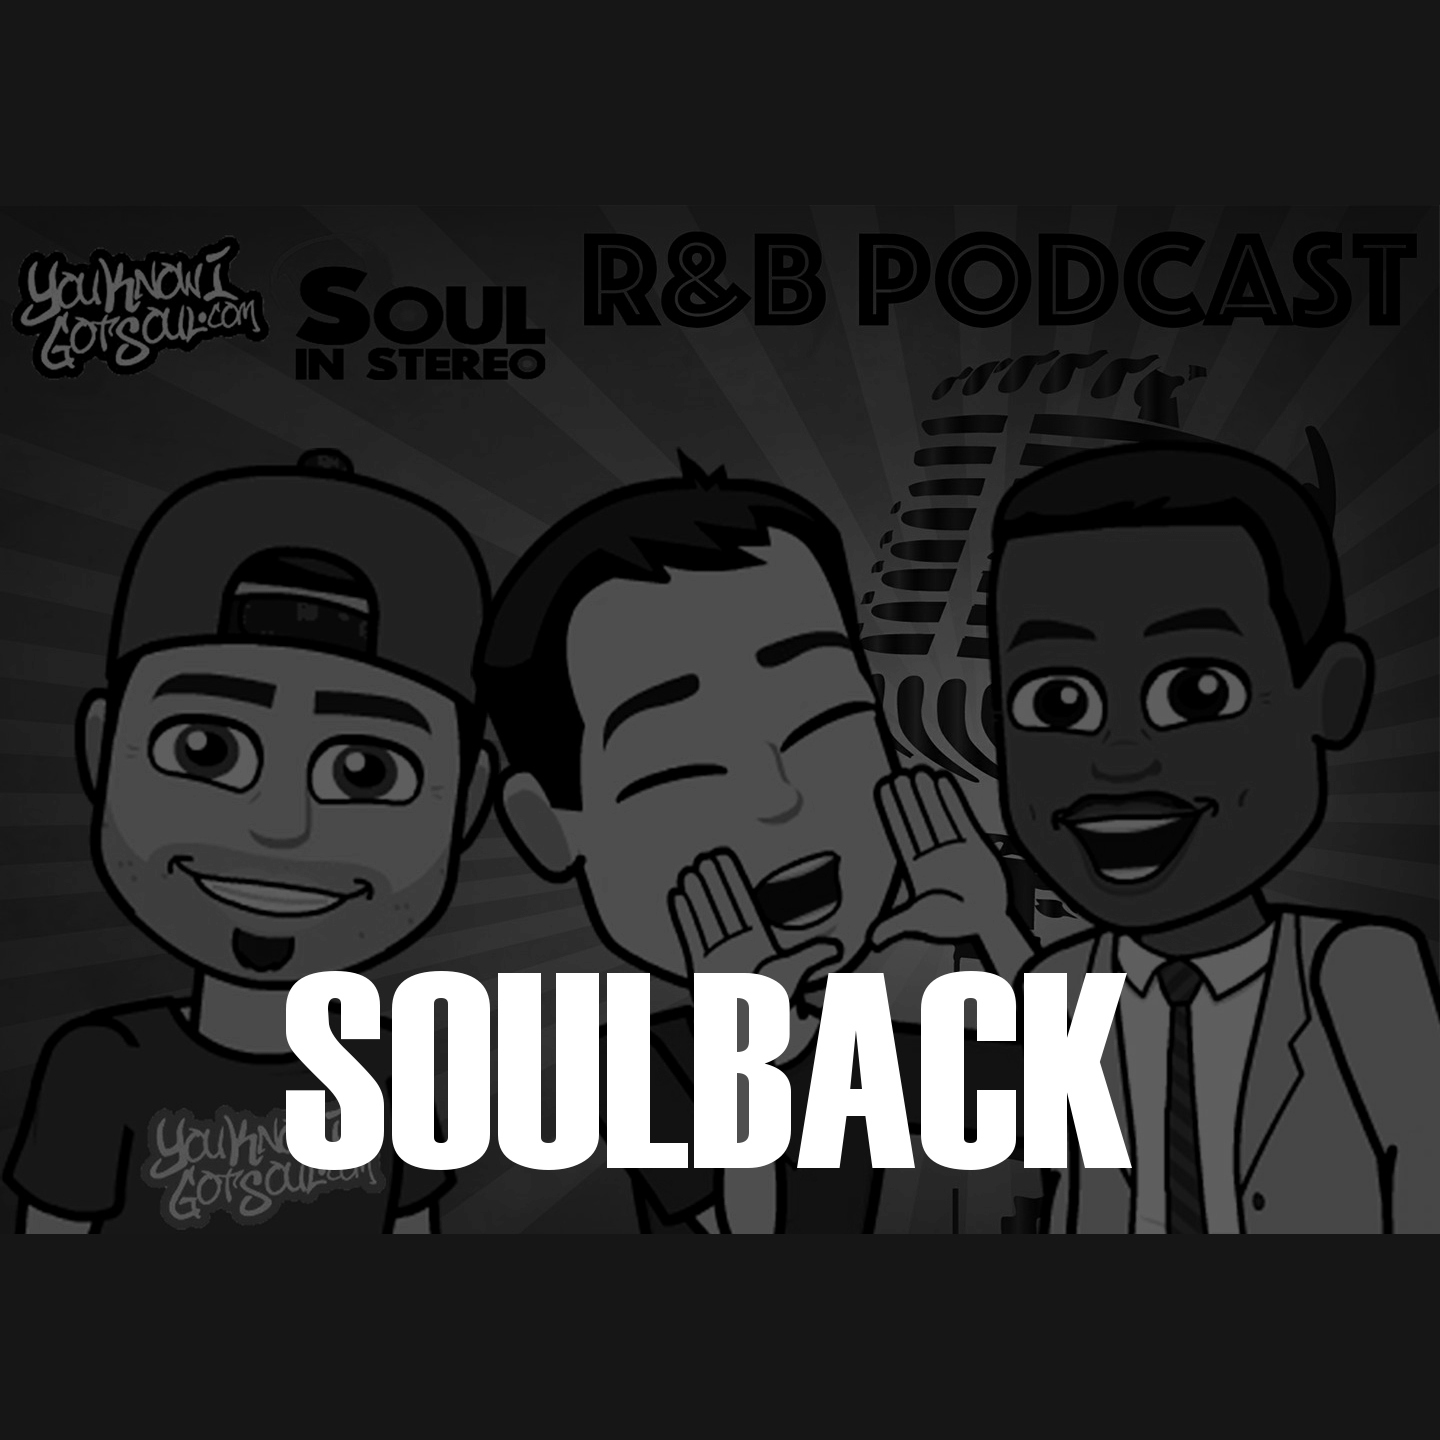 SoulBack (featuring Anna Moore) – The R&amp;B Podcast Episode 21